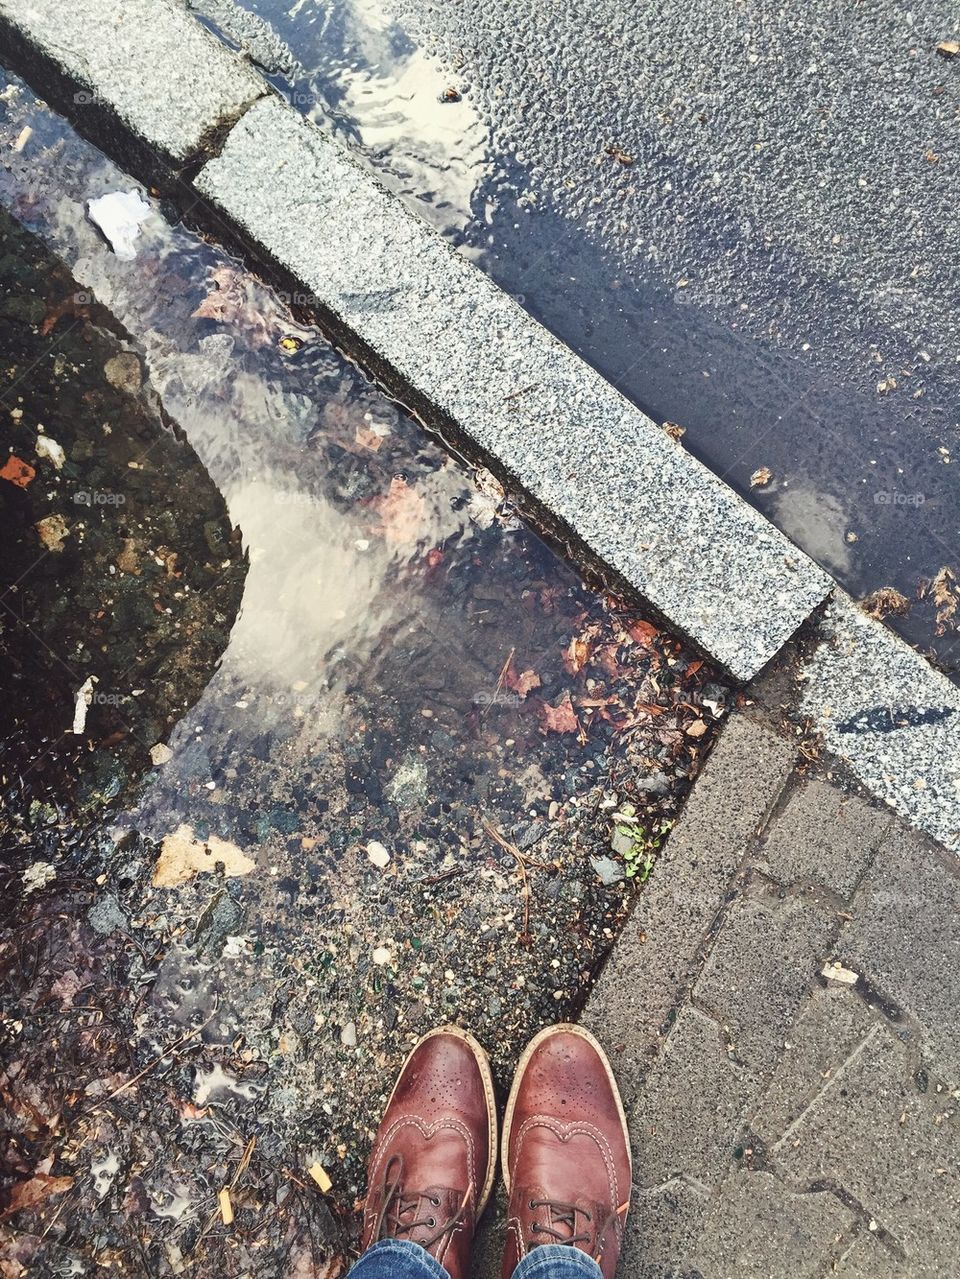 Big puddles on streets on a rainy day